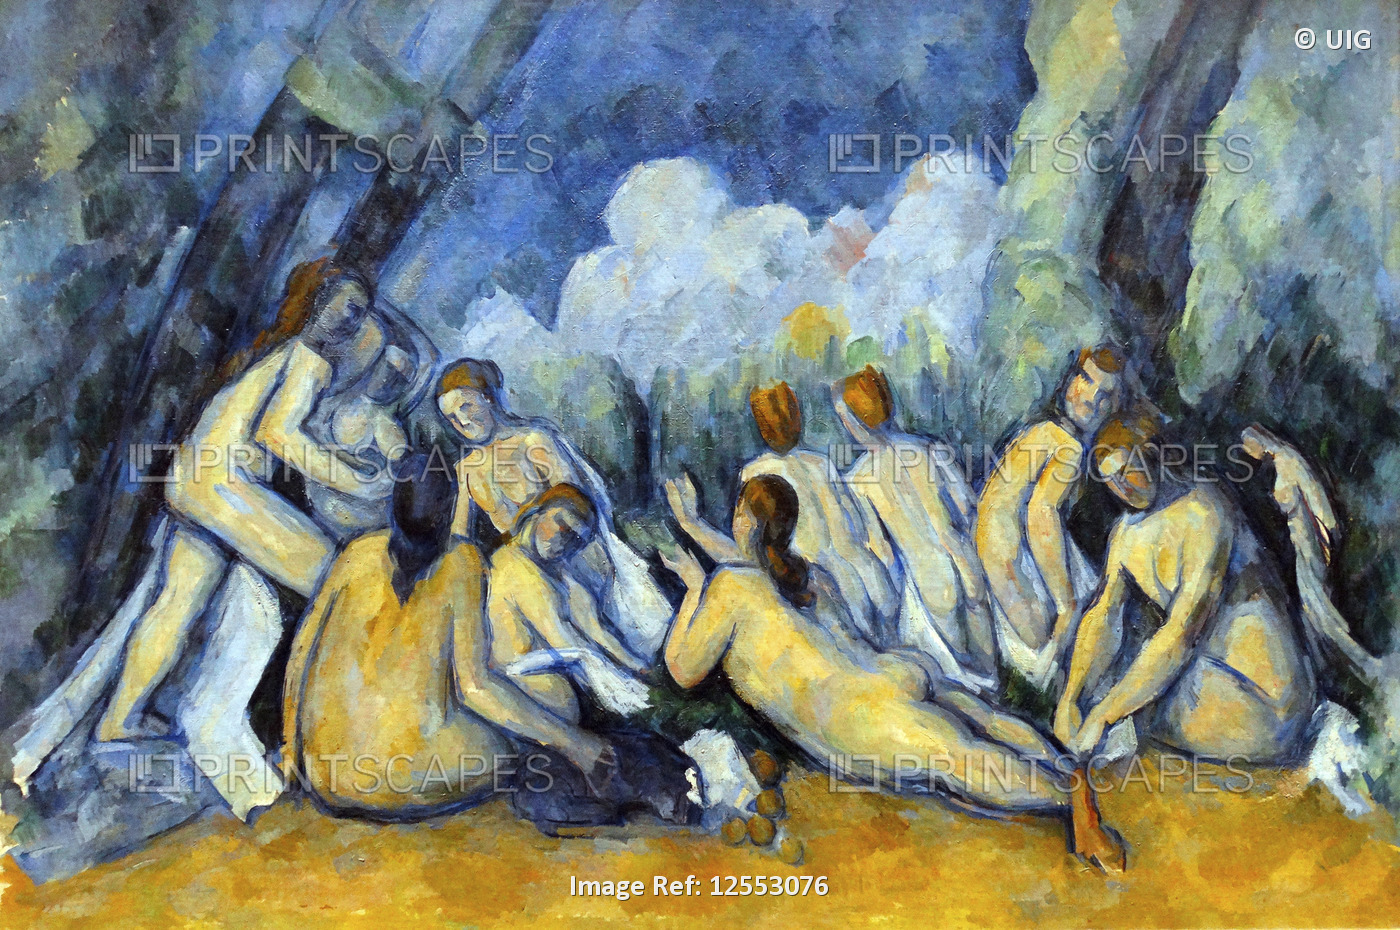 The Bathers (Les Grandes Baigneuses) by French artist Paul Cézanne, dated 1905